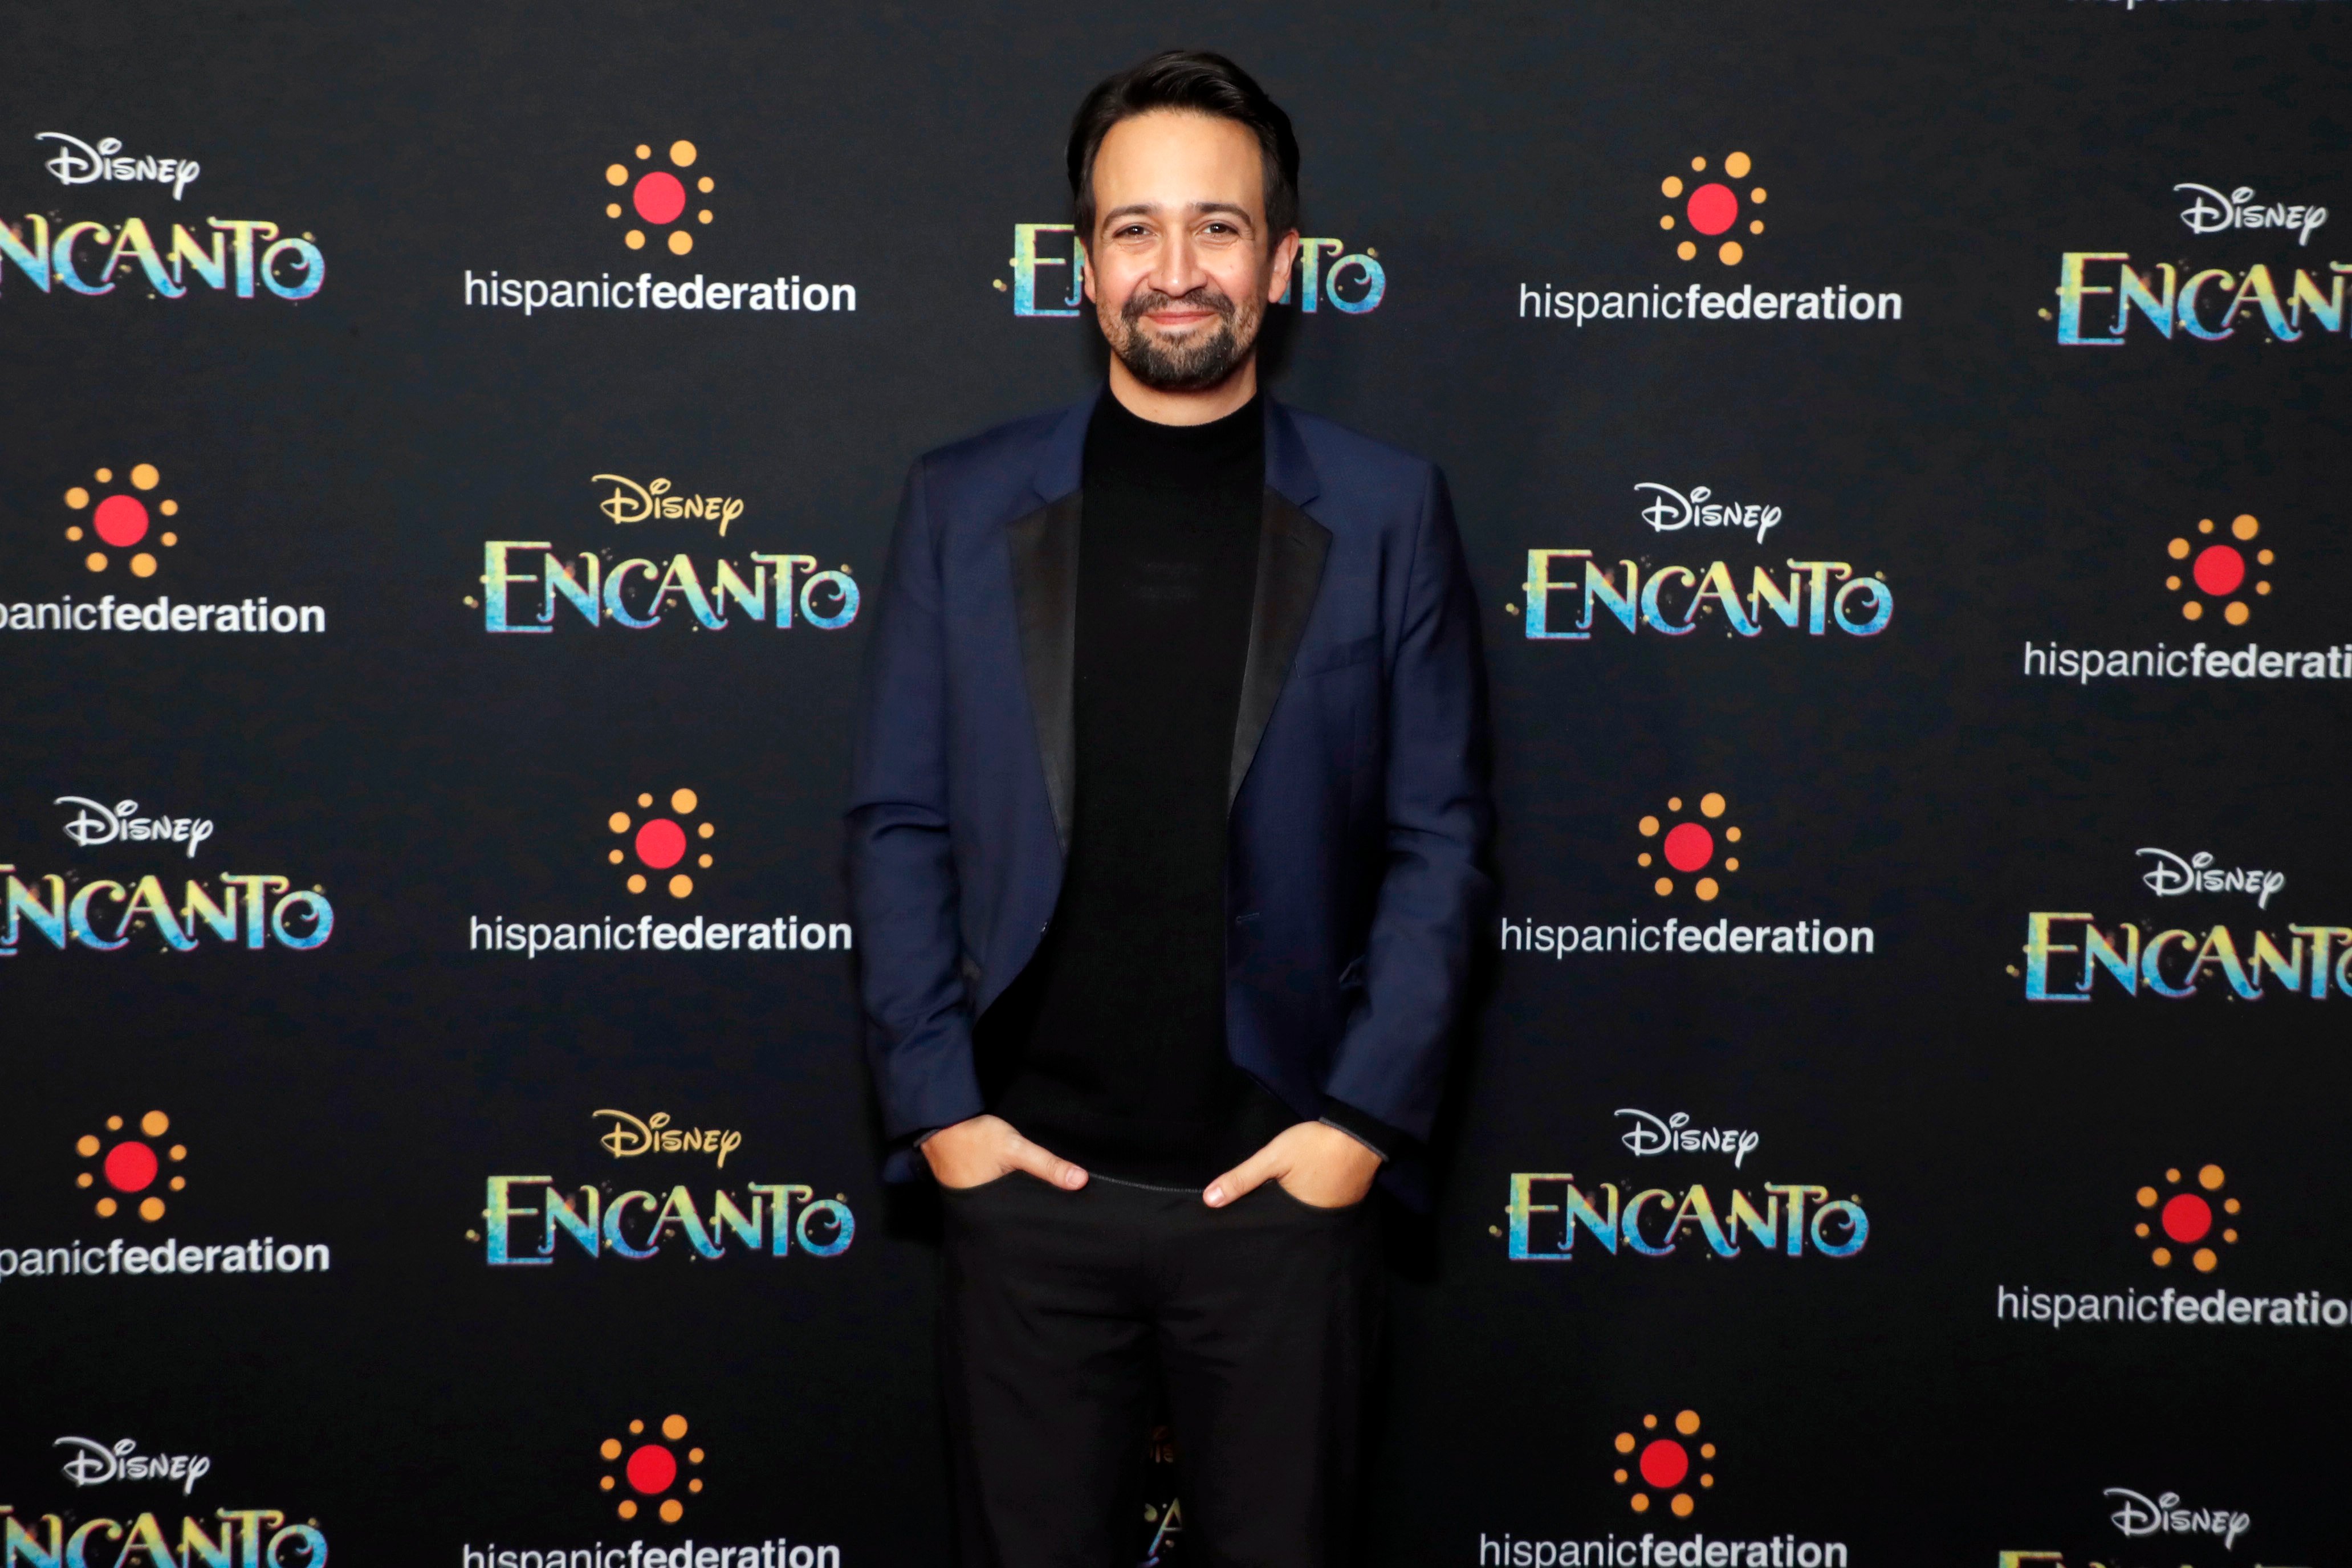 Lin-Manuel Miranda, who wrote We Don't Talk About Bruno, attends the premiere of Encanto in New York